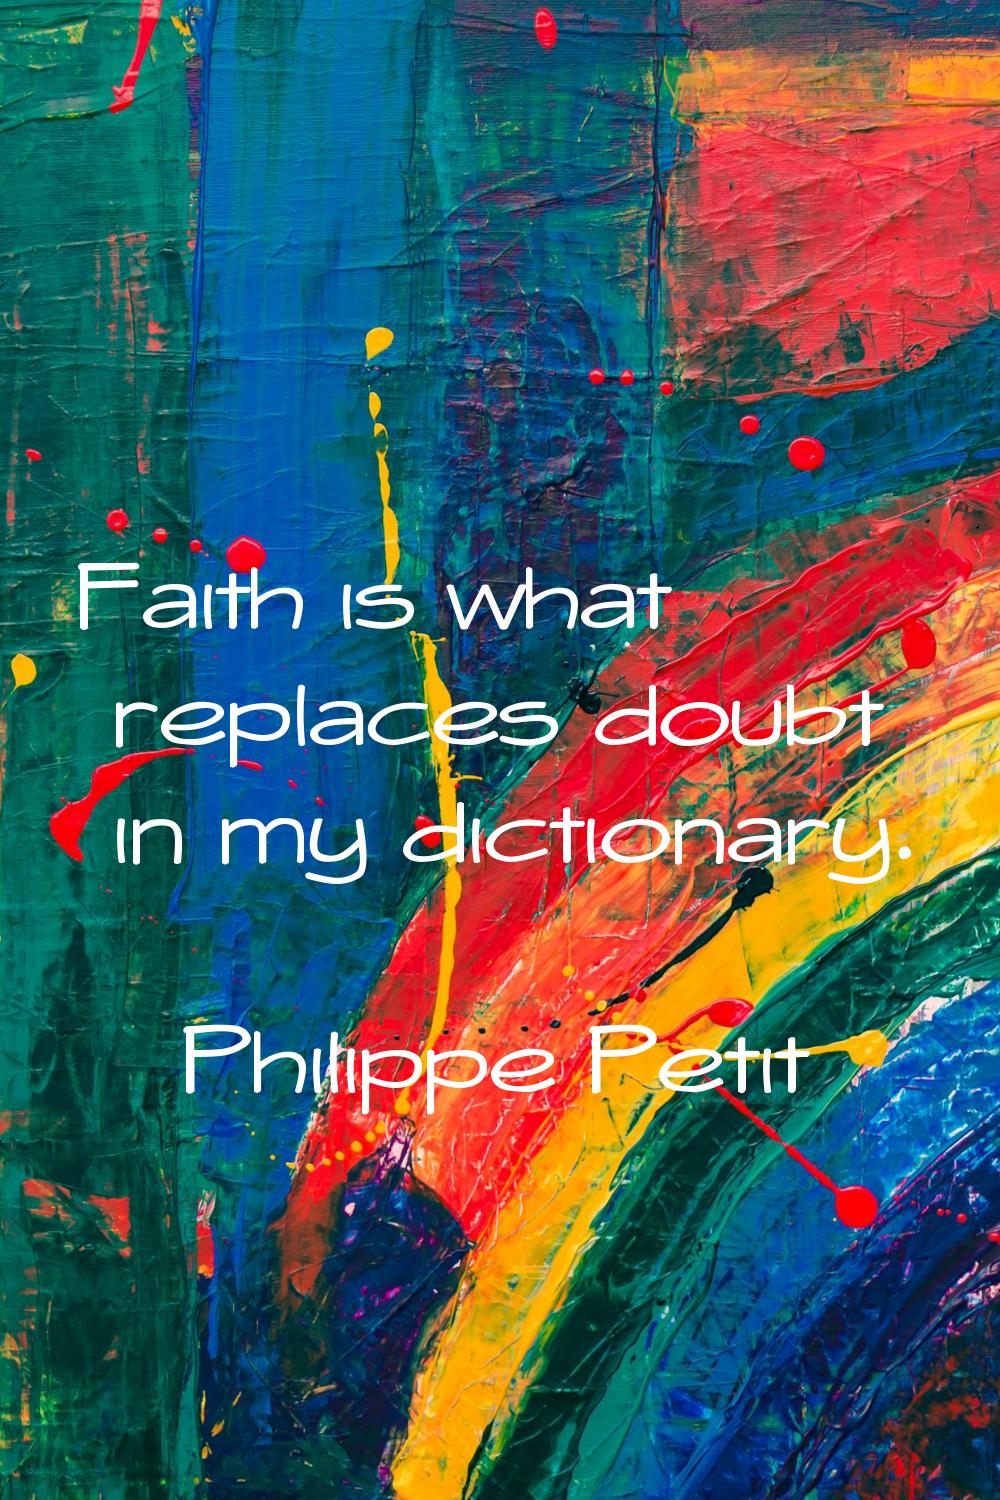 Faith is what replaces doubt in my dictionary.